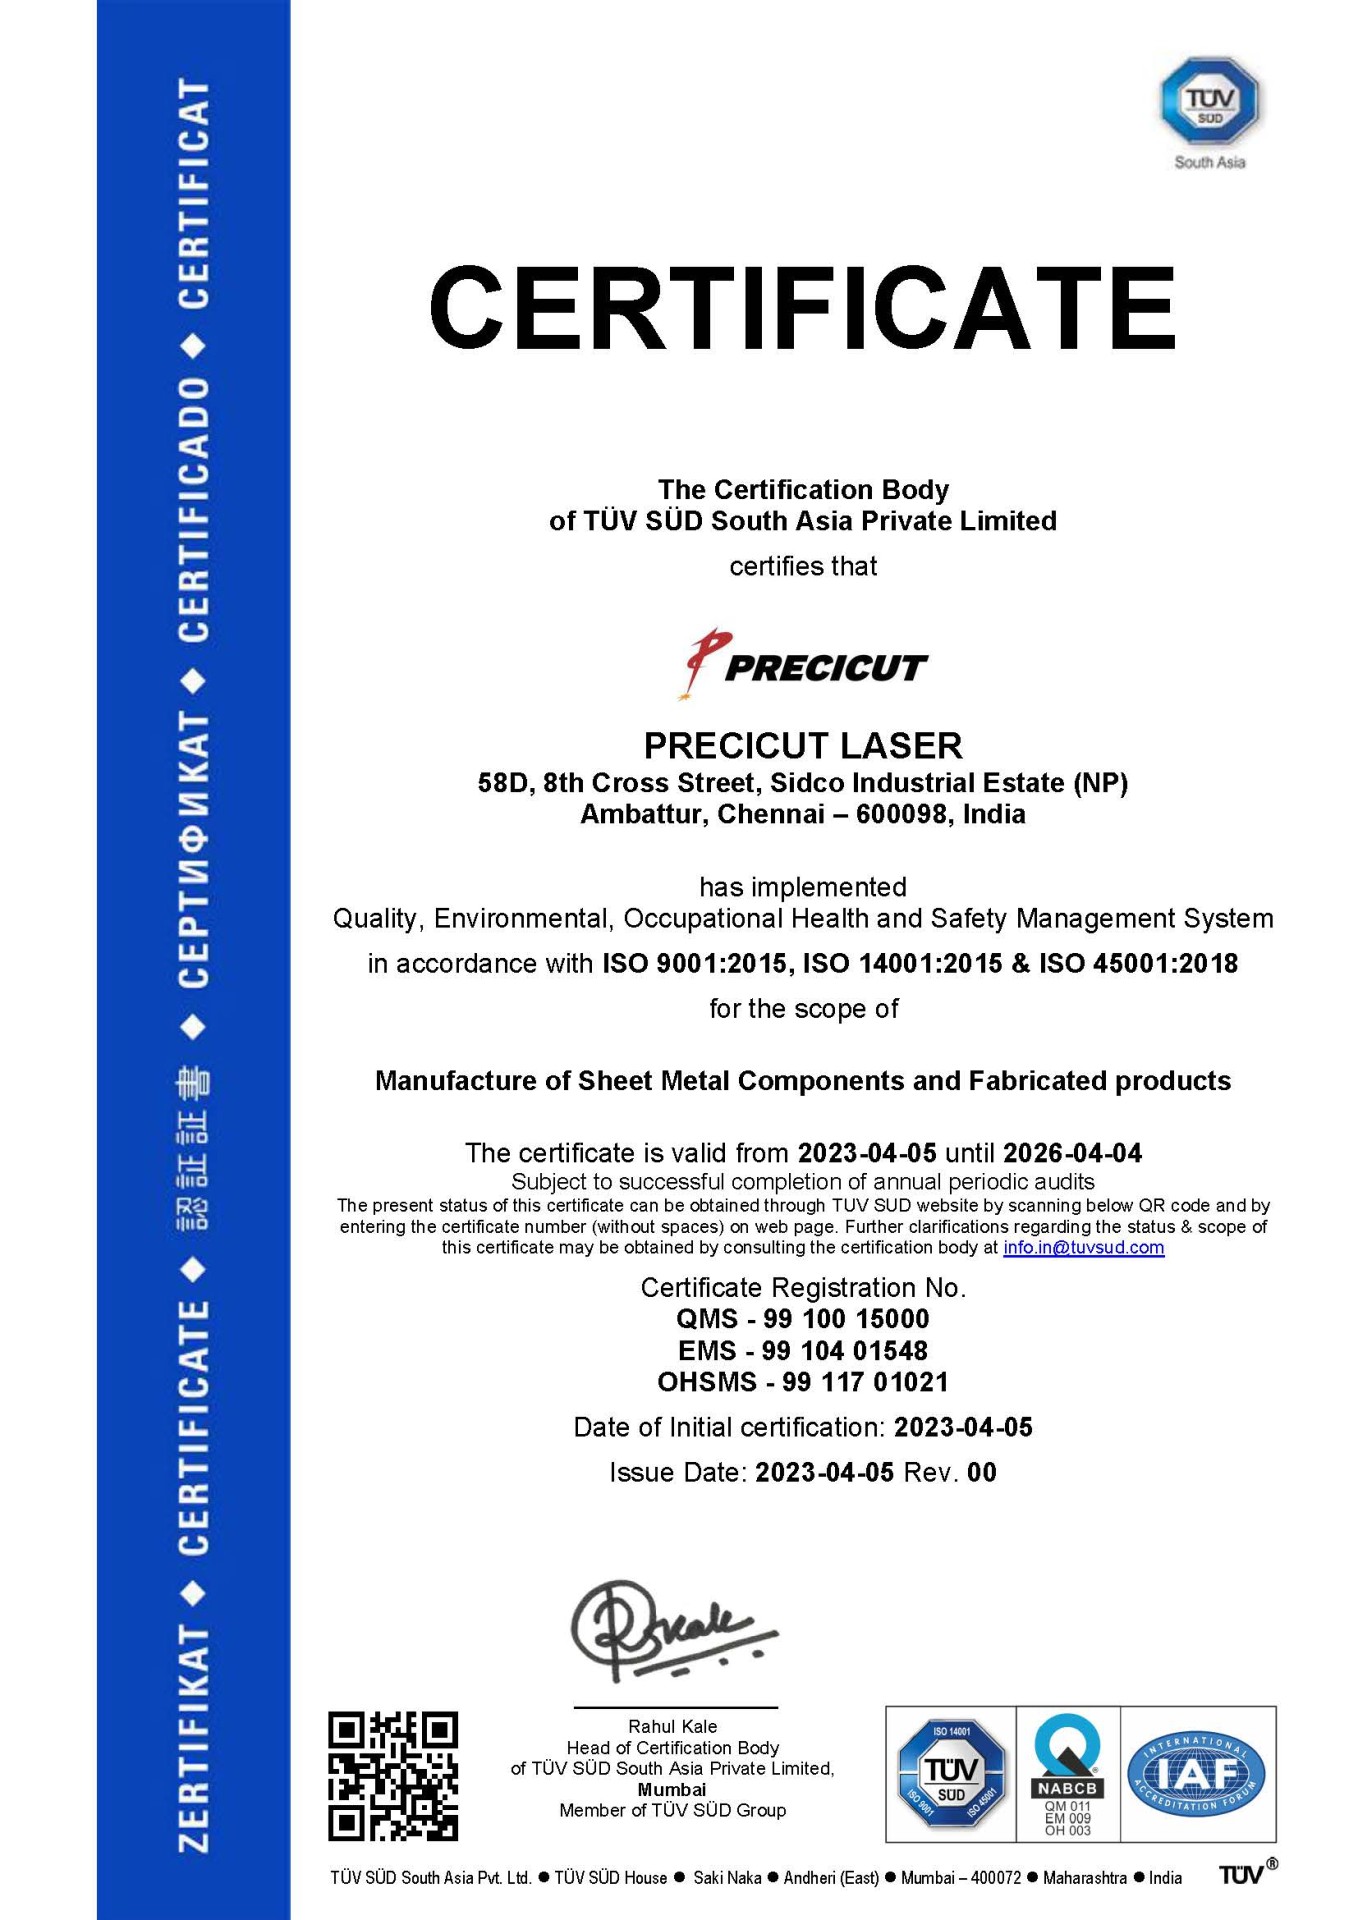 Precicut ISO 9001:2015, ISO 14001:2015 and ISO 45001:2018 Certified